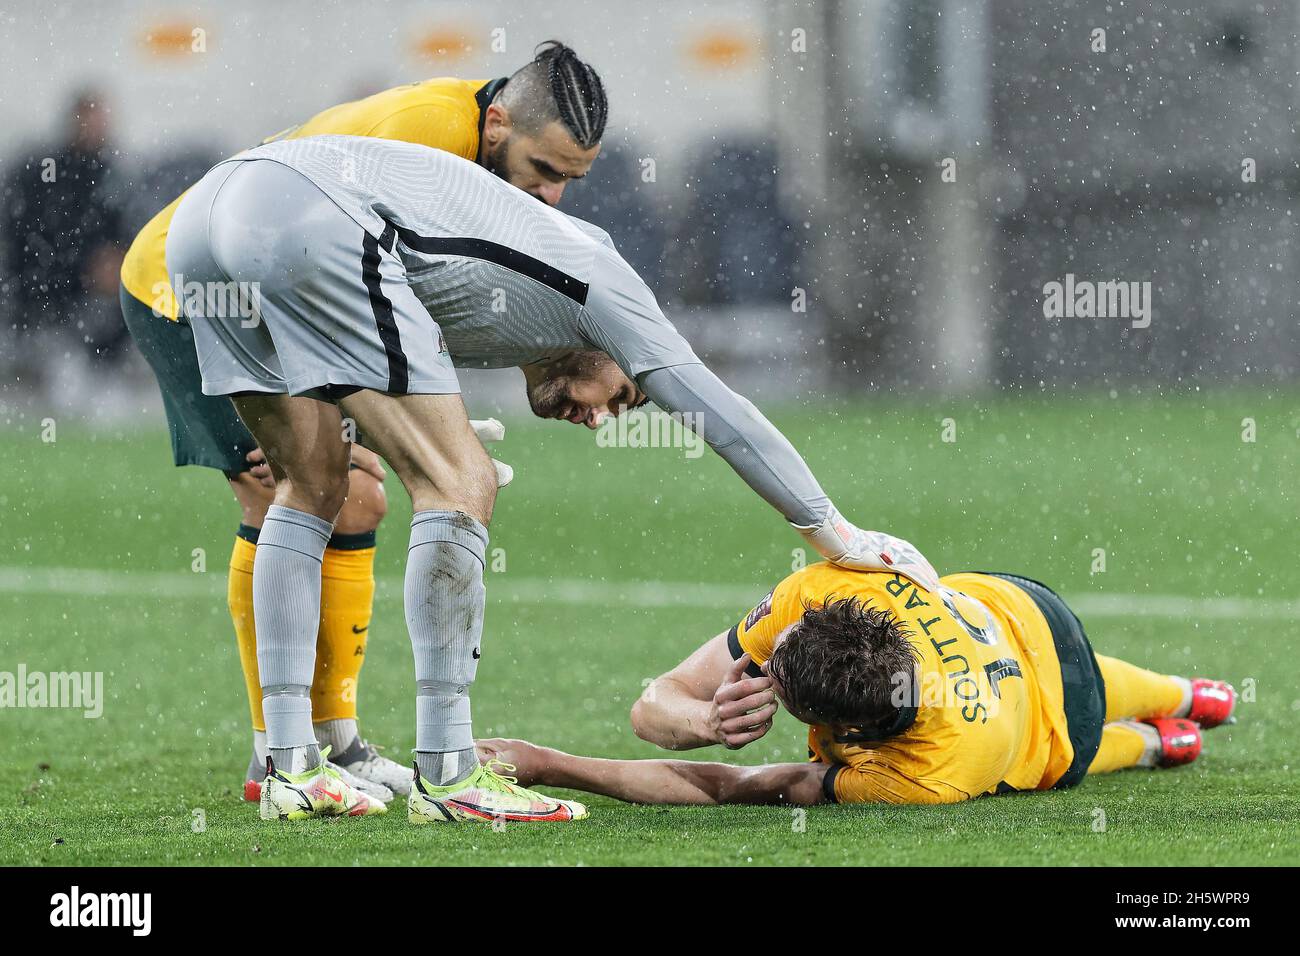 Sydney, Australia. 11th Nov, 2021. MATHEW RYAN of Australia checks up on team mate  HARRY SOUTTAR after a collision during the FIFA World Cup AFC Asian Qualifier match between the Australia Socceroos and Saudi Arabia at CommBank Stadium on November 11, 2021 in Sydney, Australia Credit: IOIO IMAGES/Alamy Live News Stock Photo